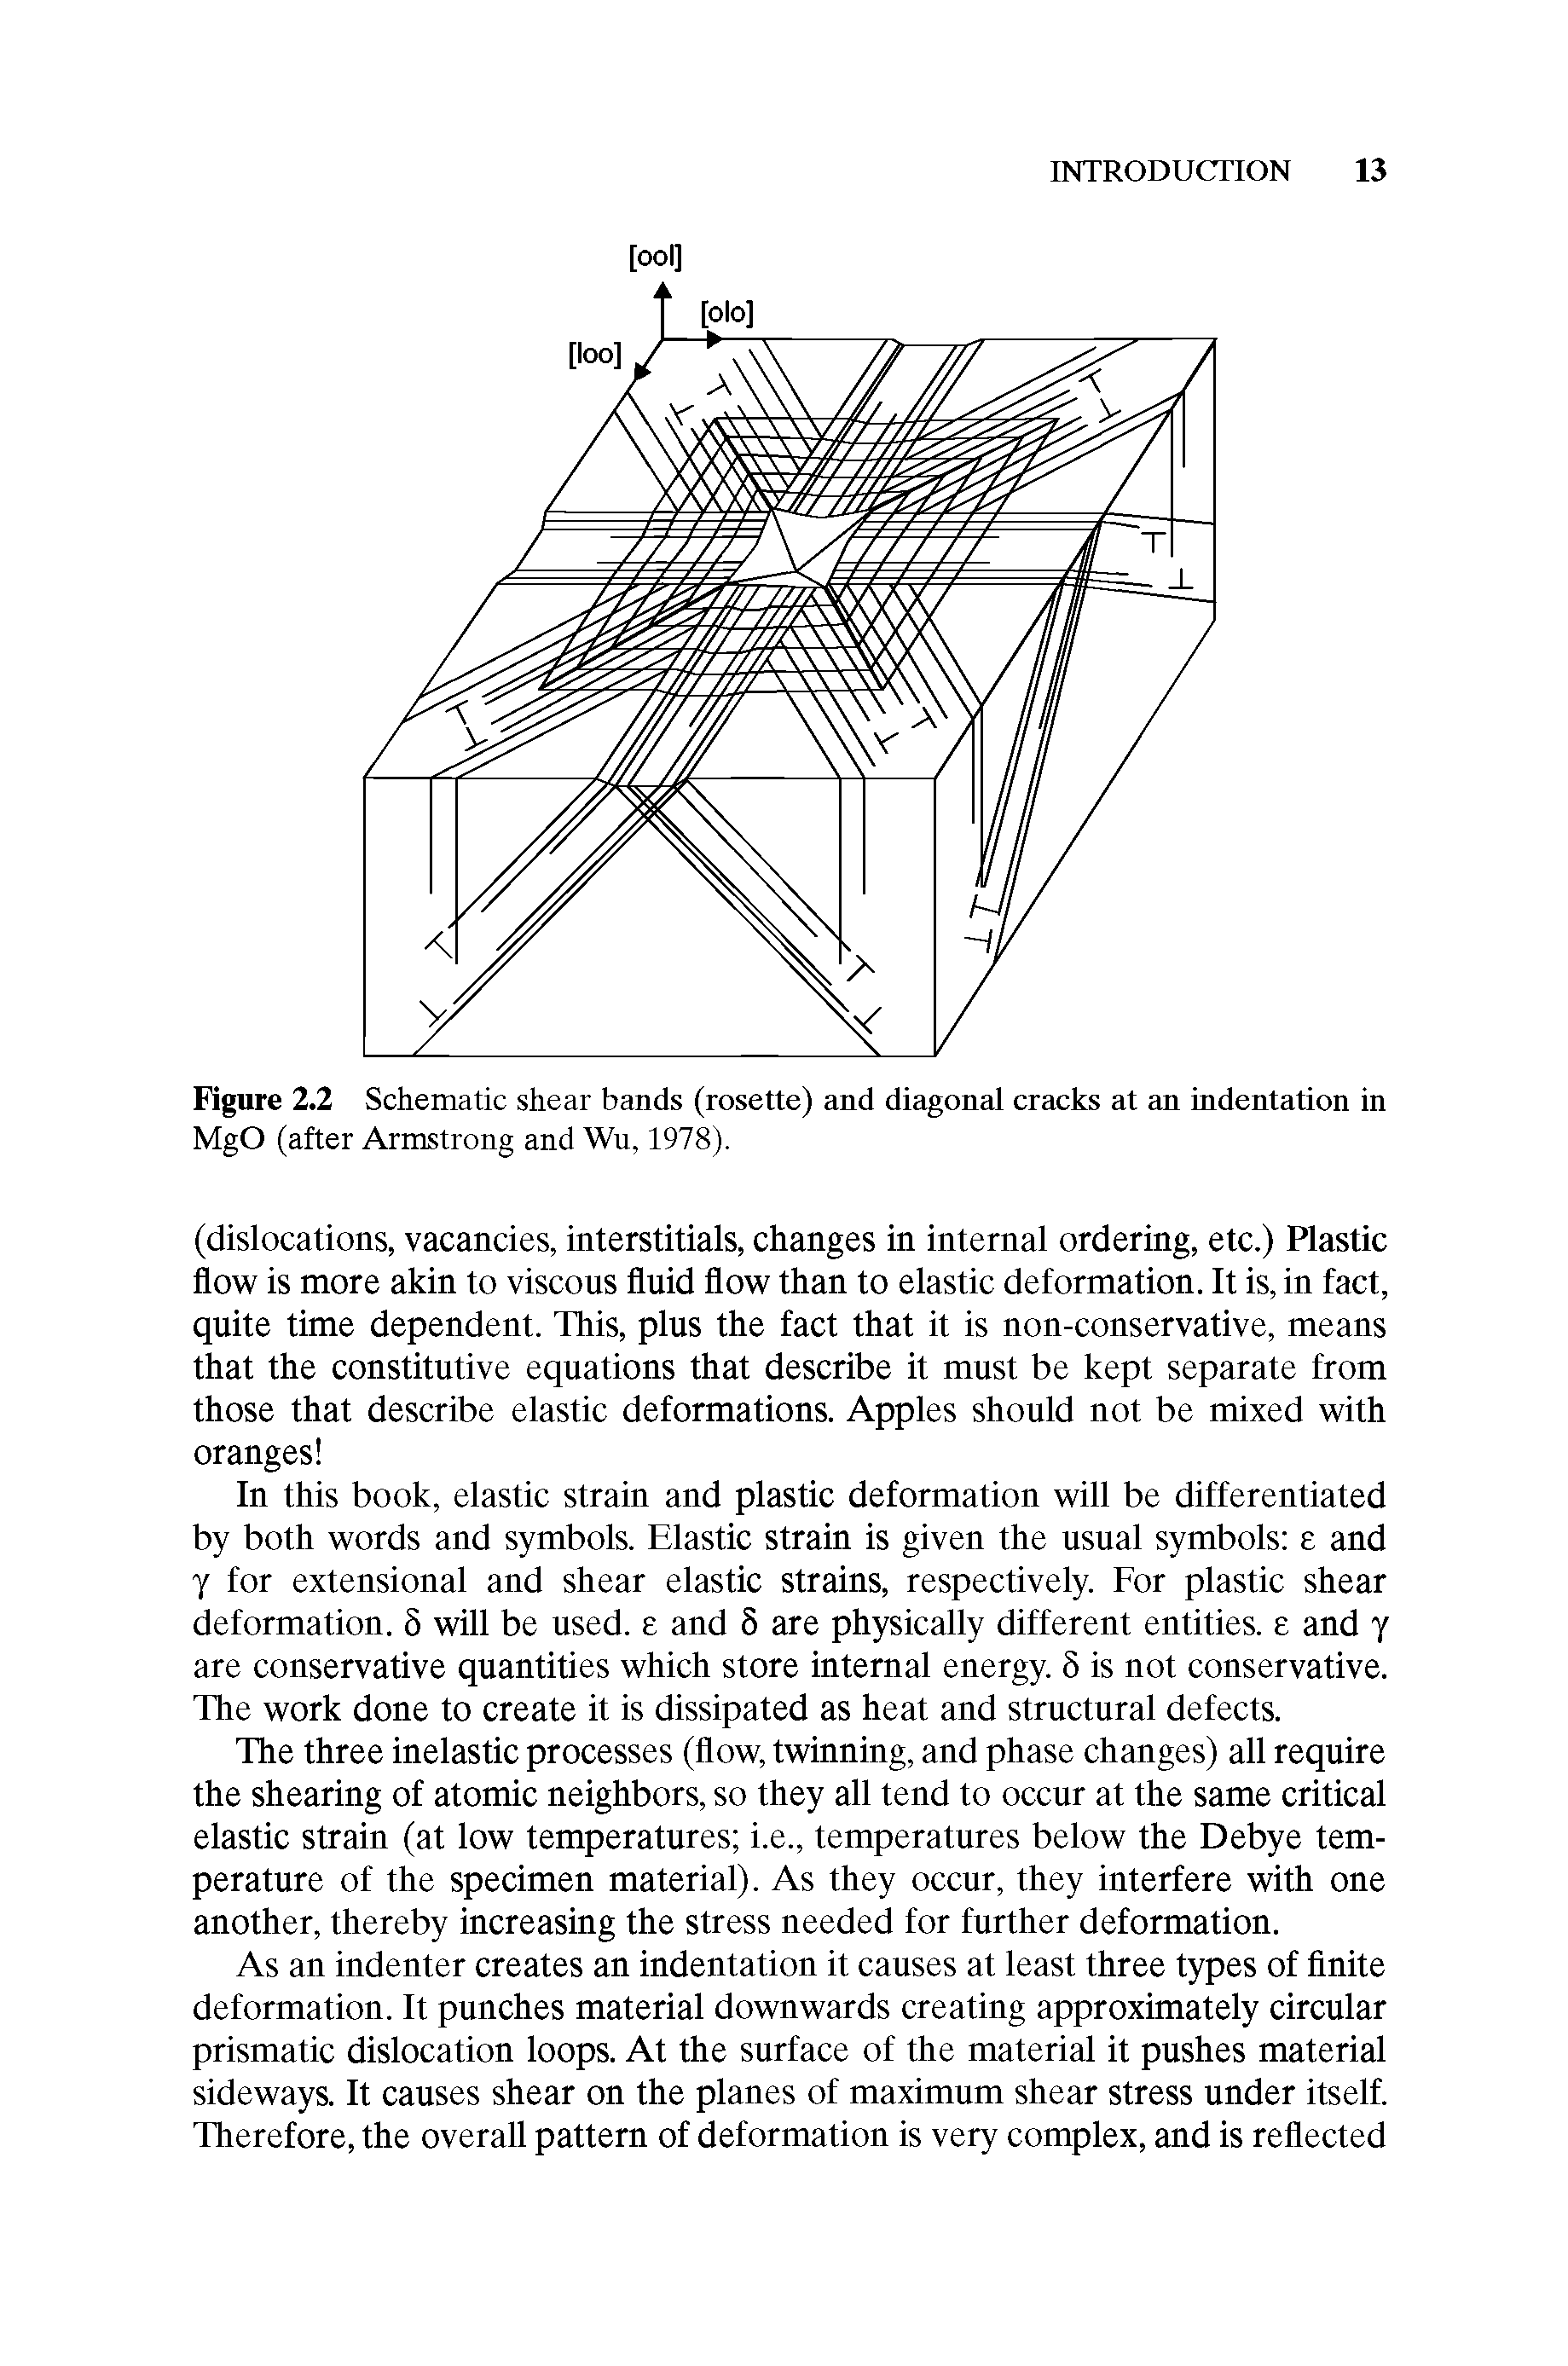 Figure 2.2 Schematic shear bands (rosette) and diagonal cracks at an indentation in MgO (after Armstrong and Wu, 1978).